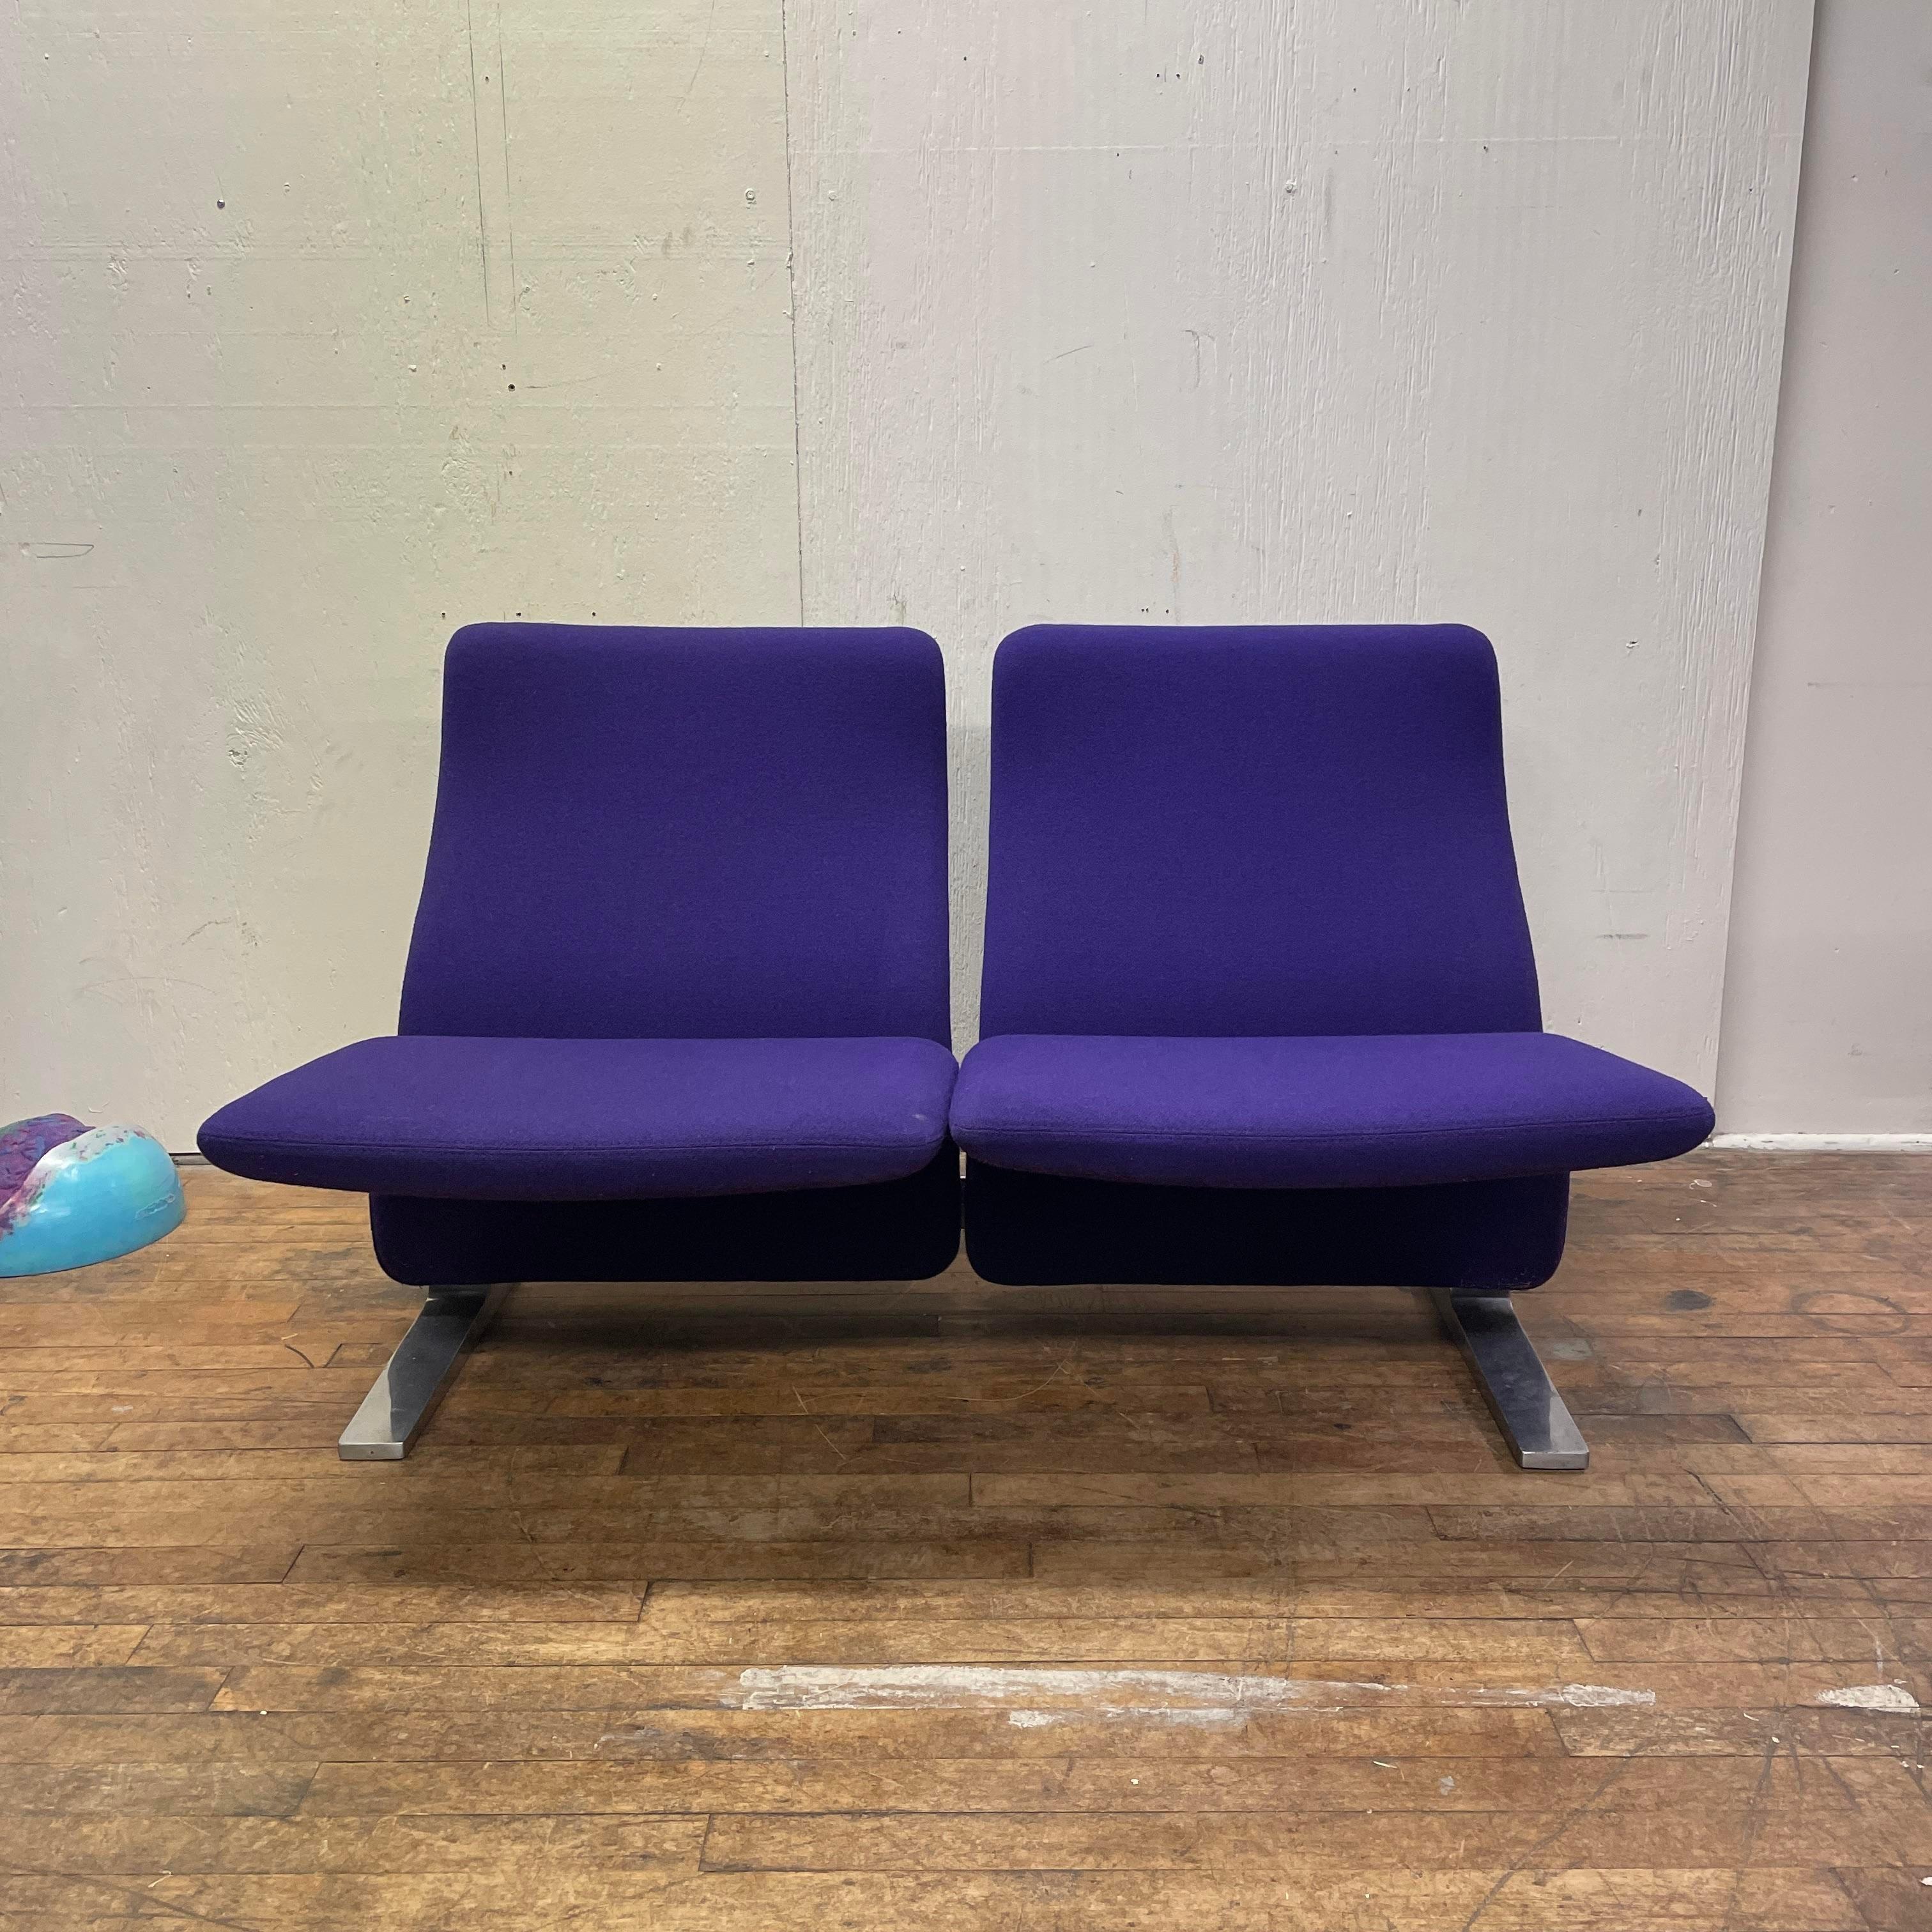 A rare Pierre Paulin model F784 sofa for Artifort upholstered in groovy purple fabric. This piece came from a single owner estate that contained many other Artifort pieces many of which are also available for purchase. The upholstery is in very good